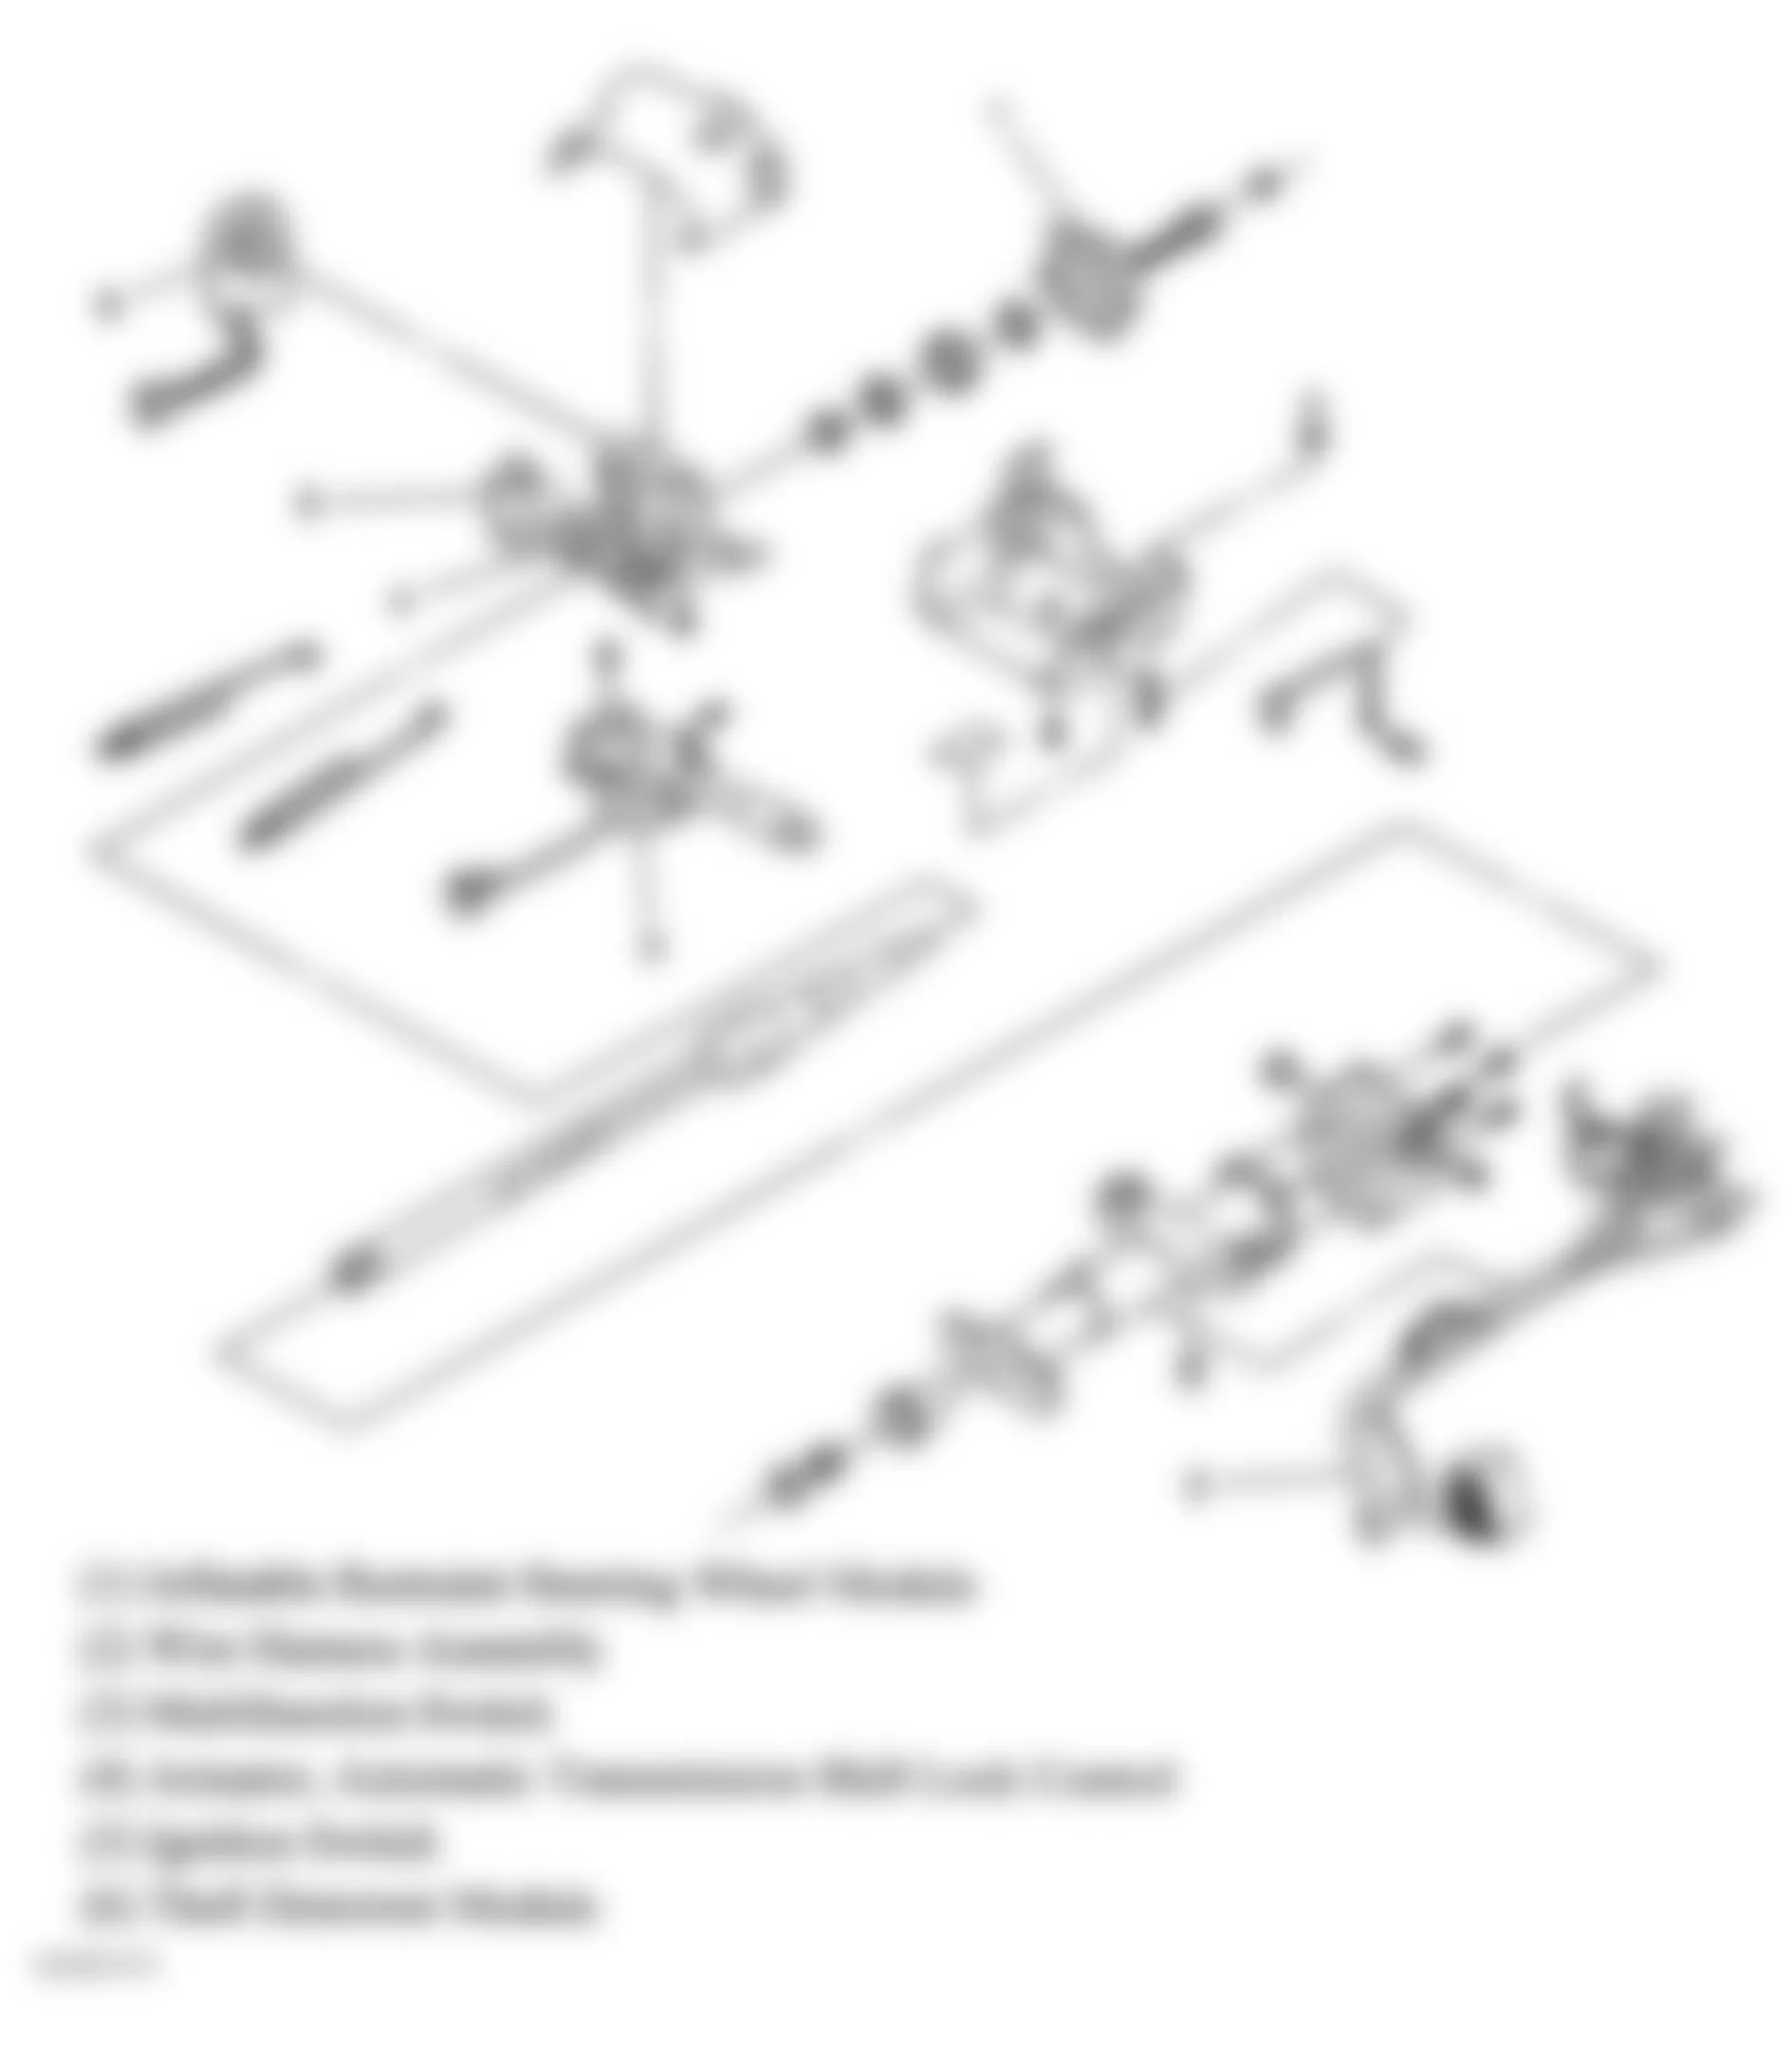 Buick Rendezvous Ultra 2005 - Component Locations -  Steering Column Disassembled View (Pontiac)